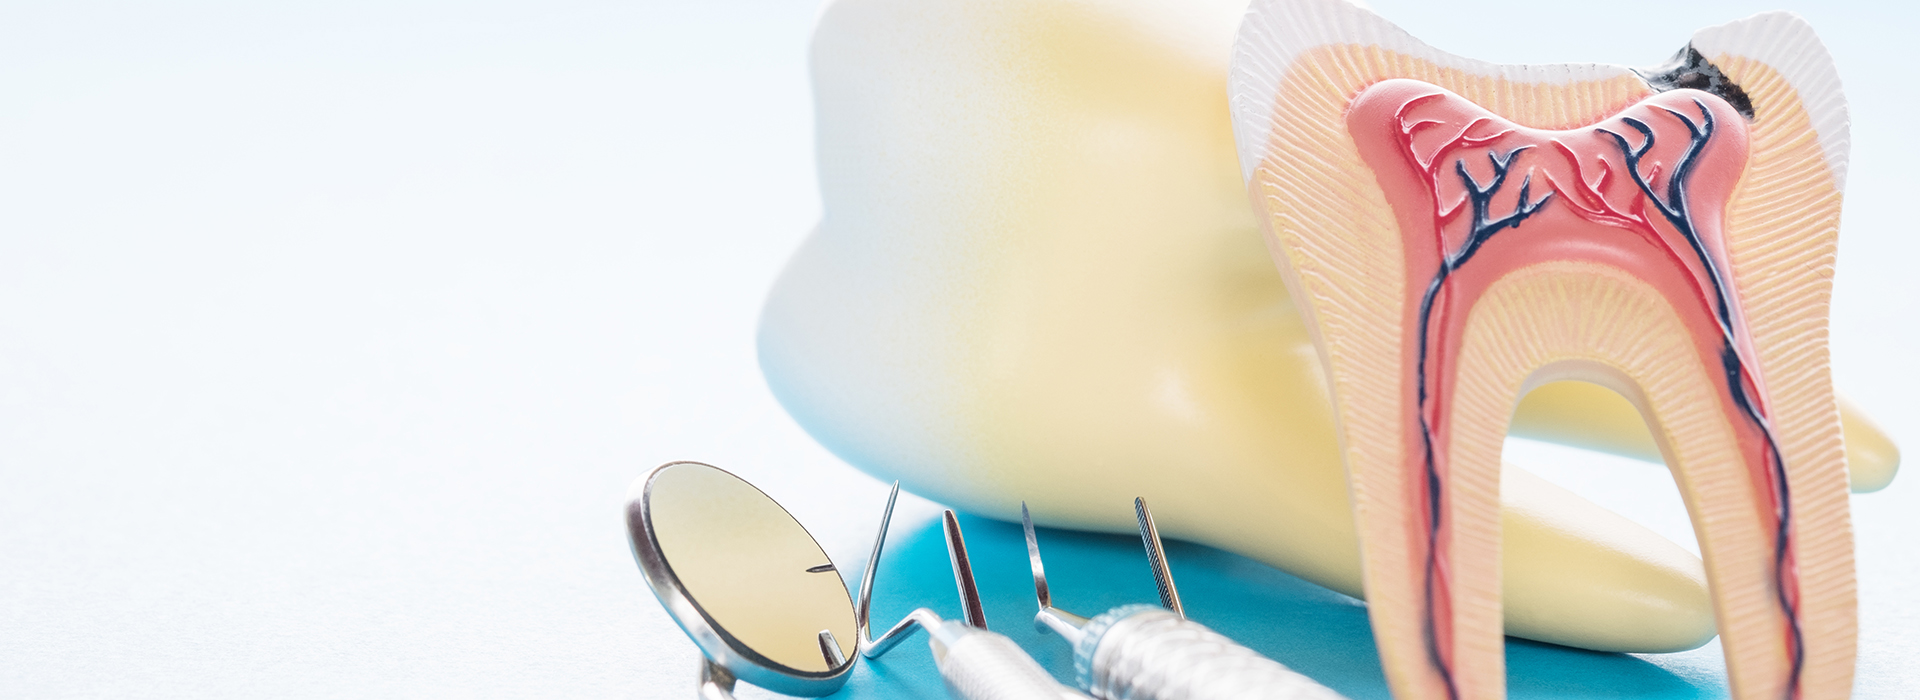 All About Smiles | Periodontal Treatment, Digital Radiography and Sleep Apnea